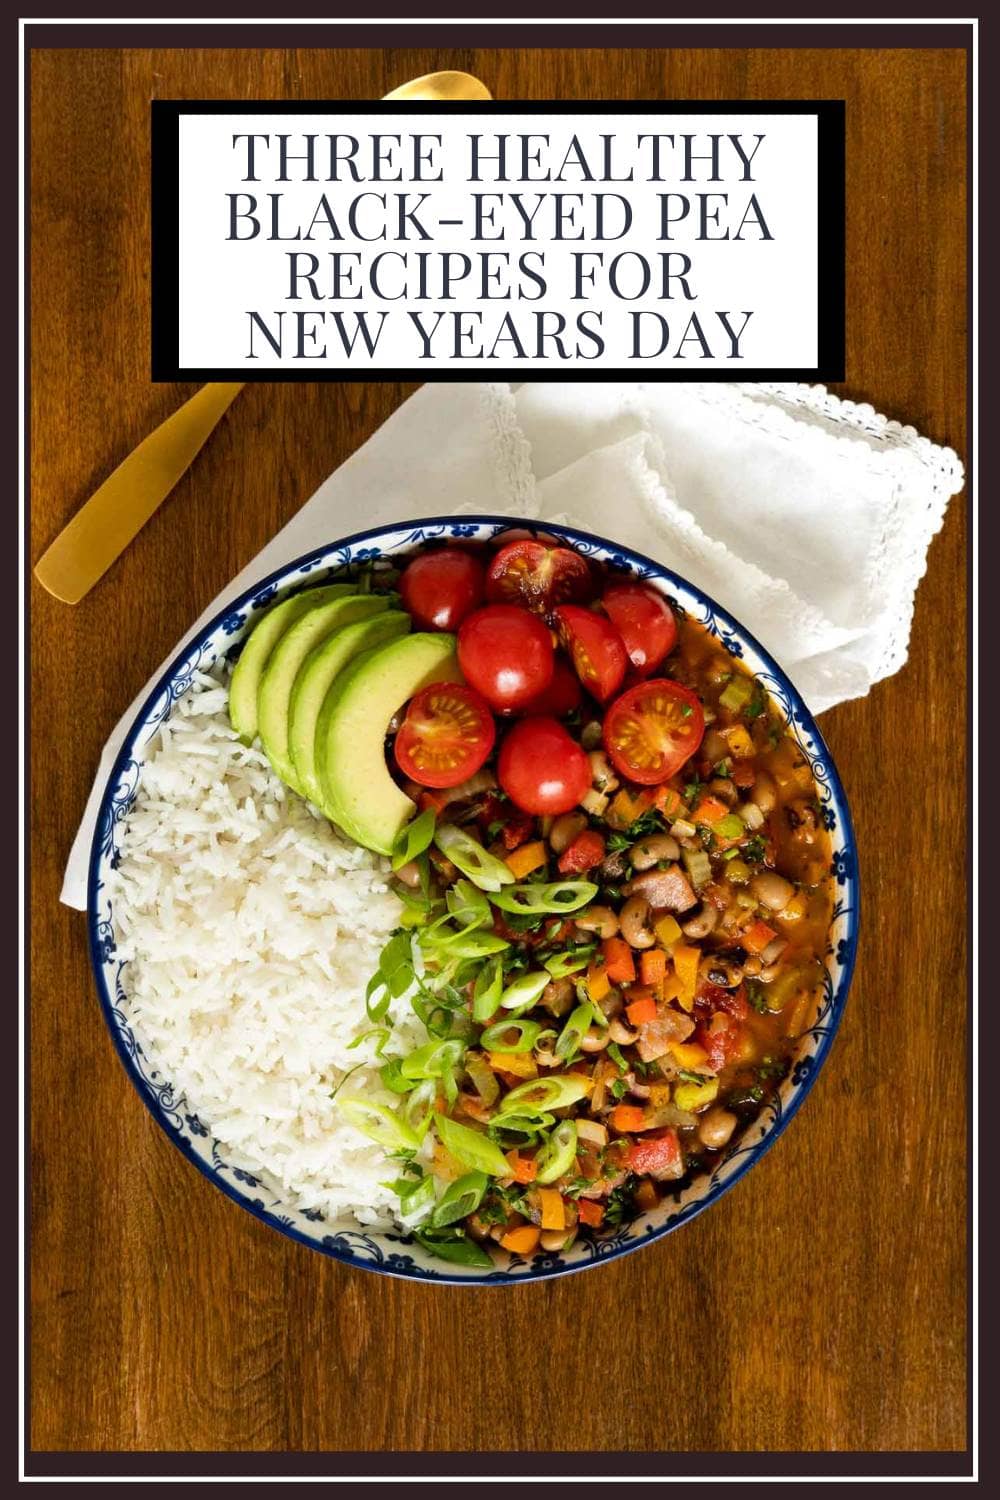 Three Healthy Black-Eyed Pea Recipes for New Year\'s Day -Your Taste Buds Will be Smiling!